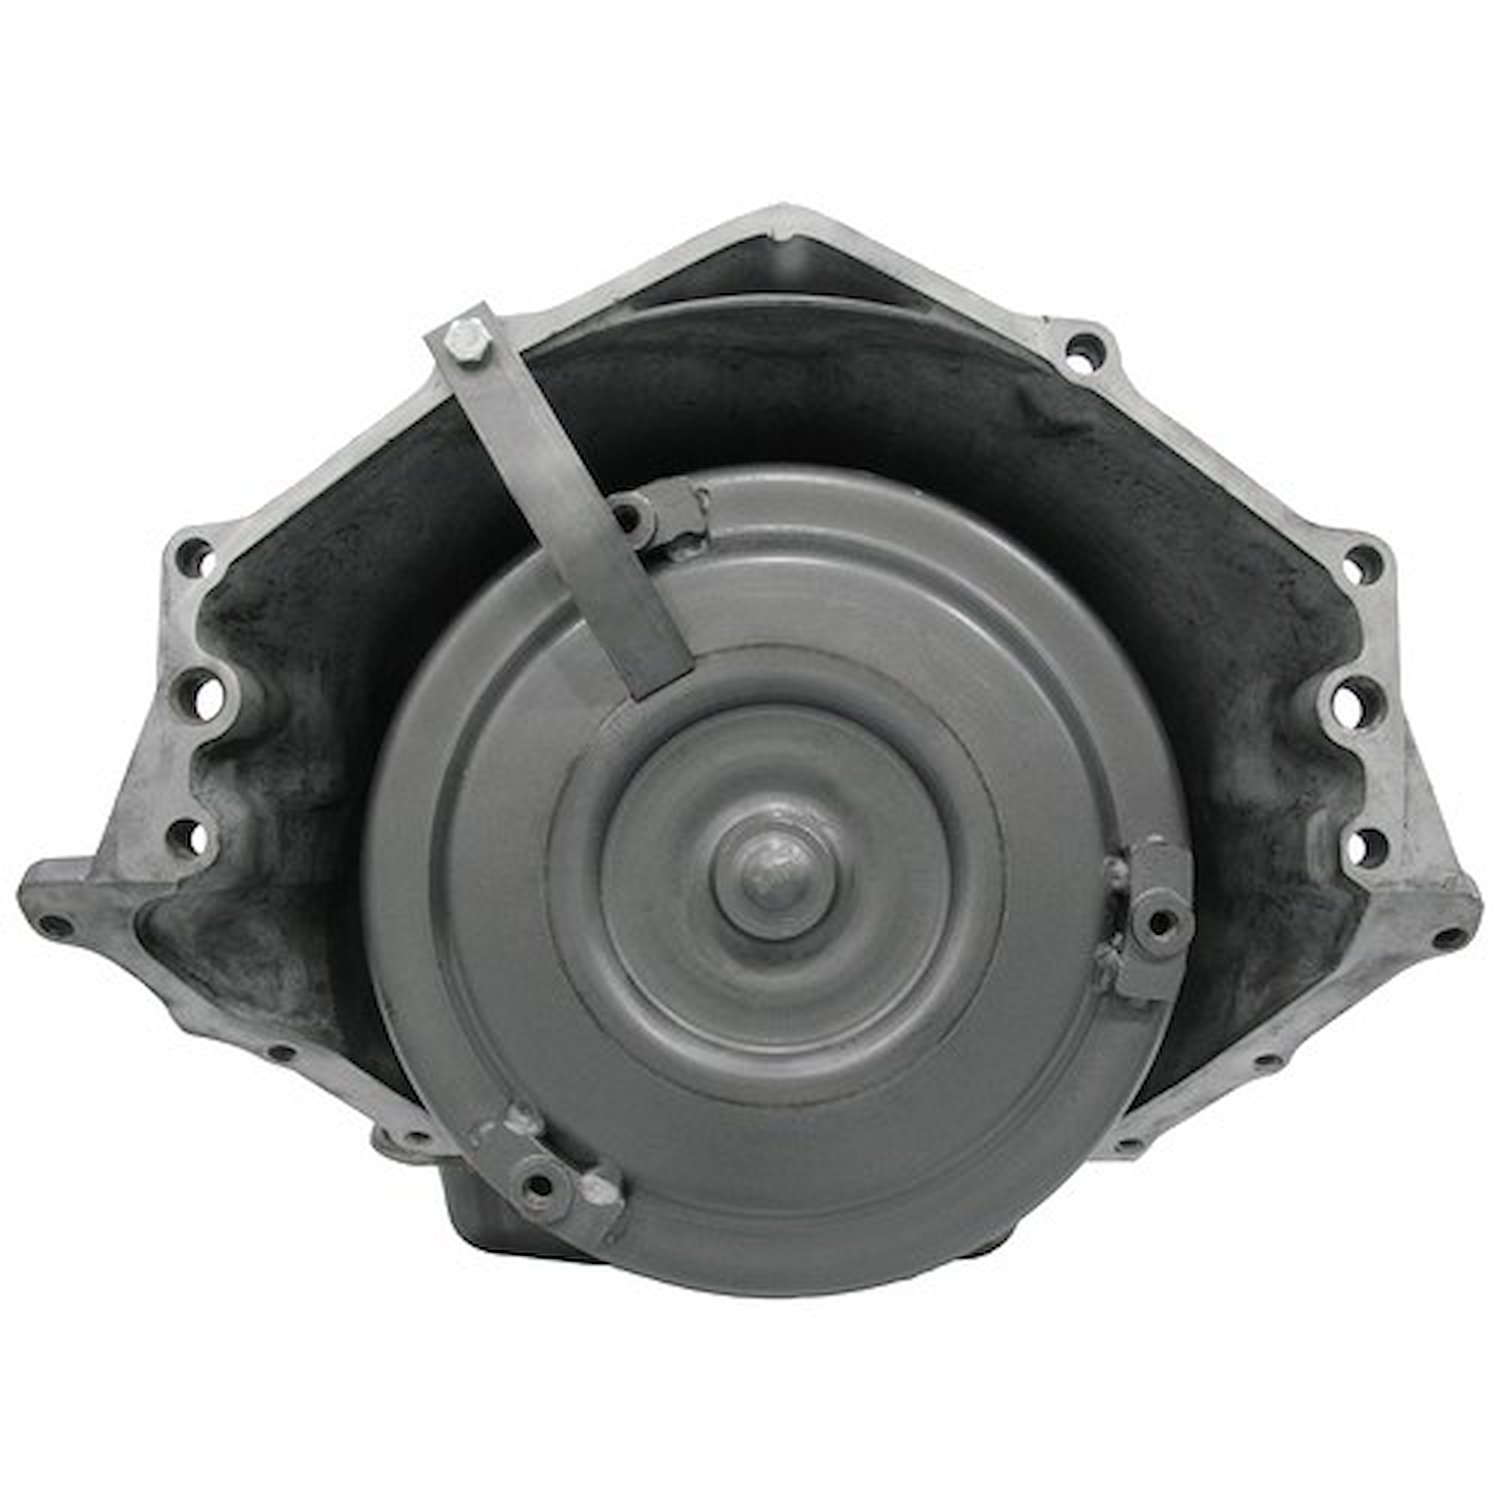 AOD Reman Auto Trans Fits 1990-1993 Ford Mustang w/5.0L 302 V8 Eng.